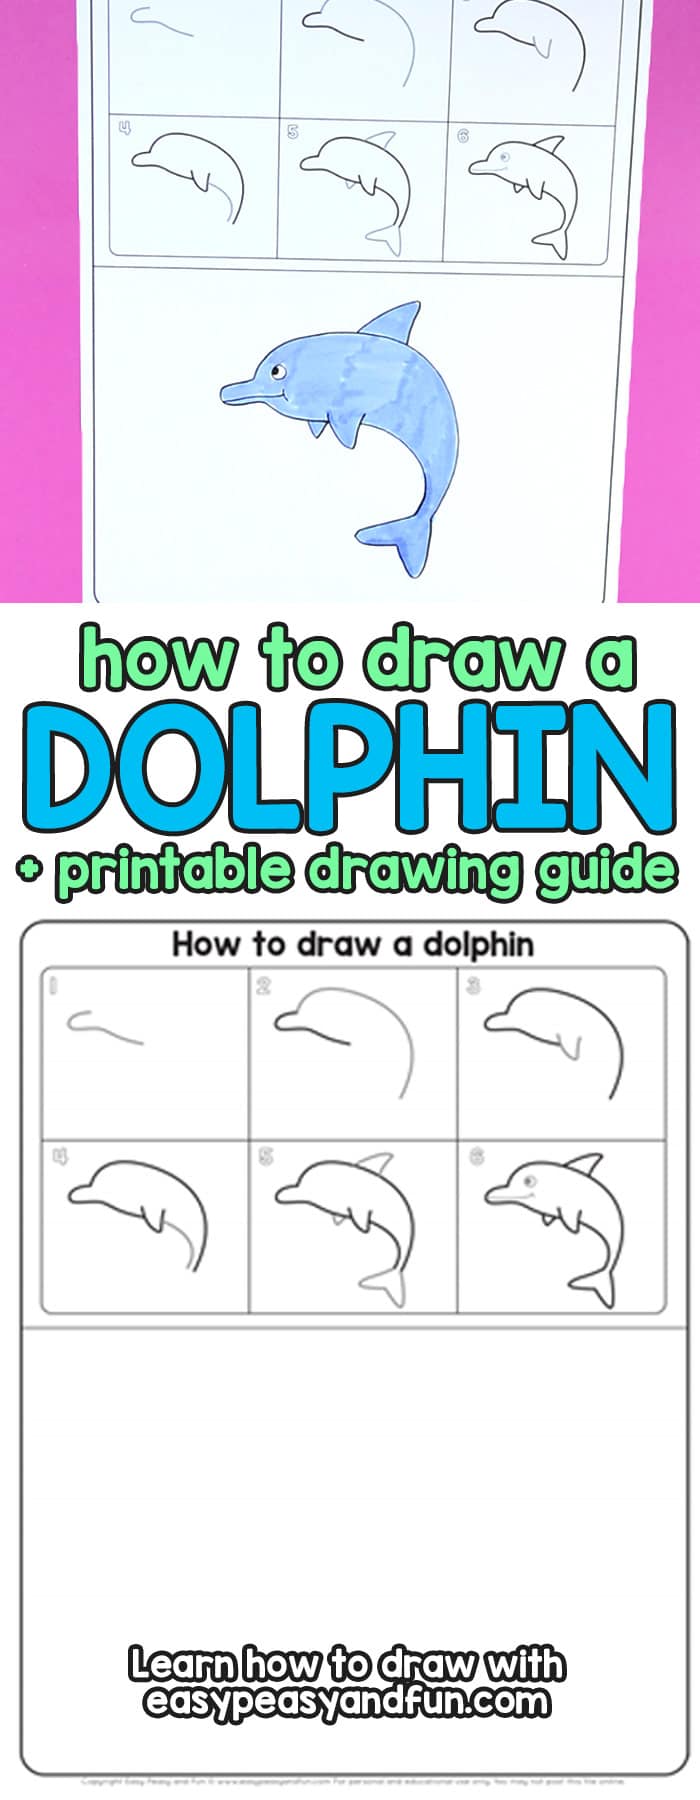 Learn How to Draw a Dolphin in Jumping out of Water Pose Step by Step Tutorial for Kids